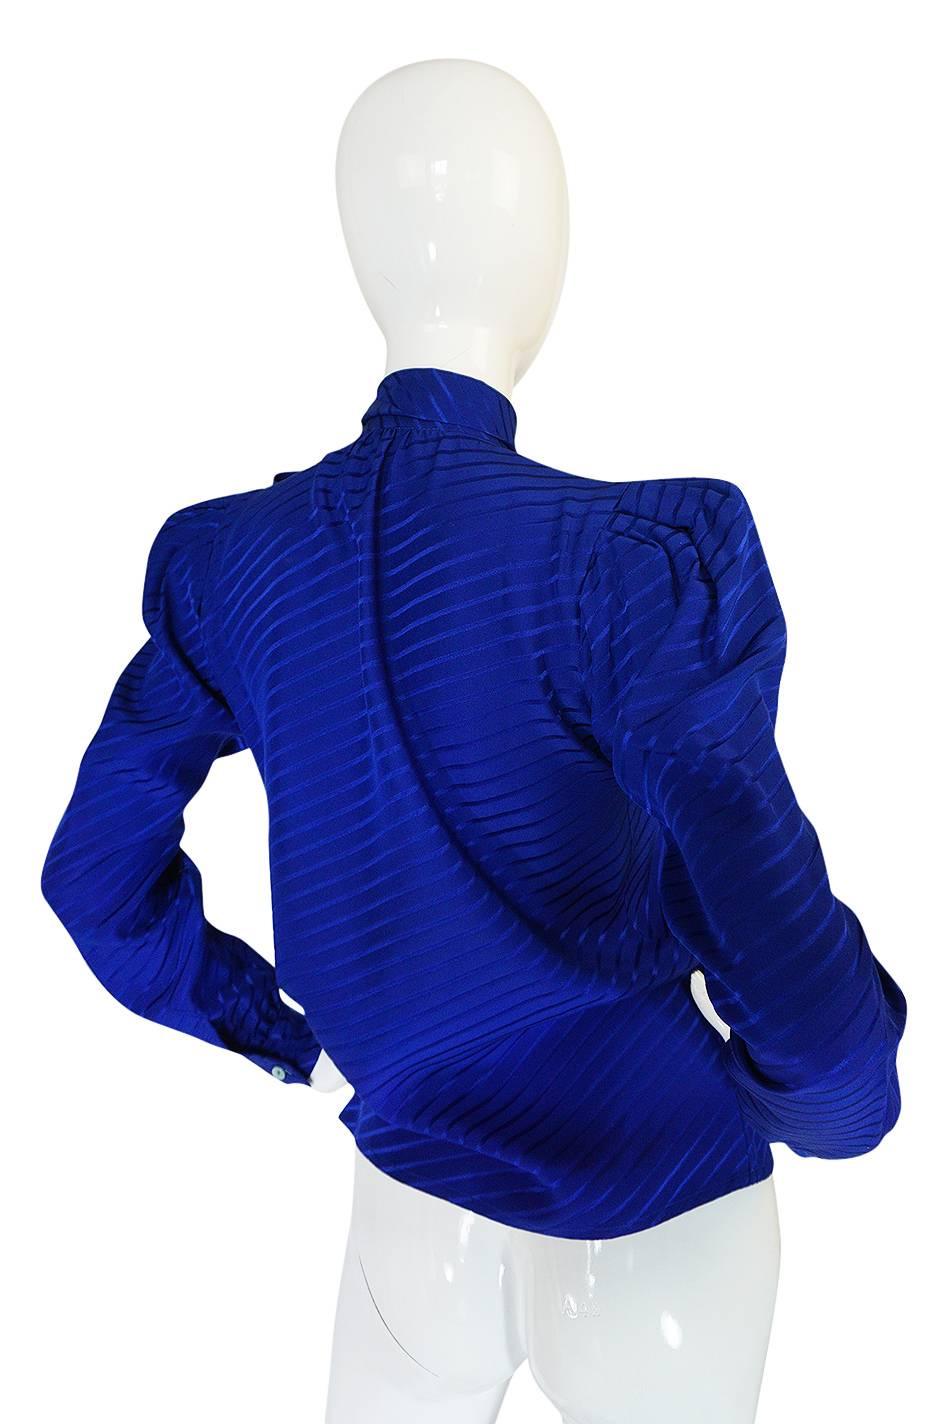 This is a classic signature look, silk secretary blouse by Yves Saint Laurent done in a beautiful rich blue silk with a angled line woven through the fabric. The silk is cut on the bias so once it is on the body the top moves and drapes perfectly as